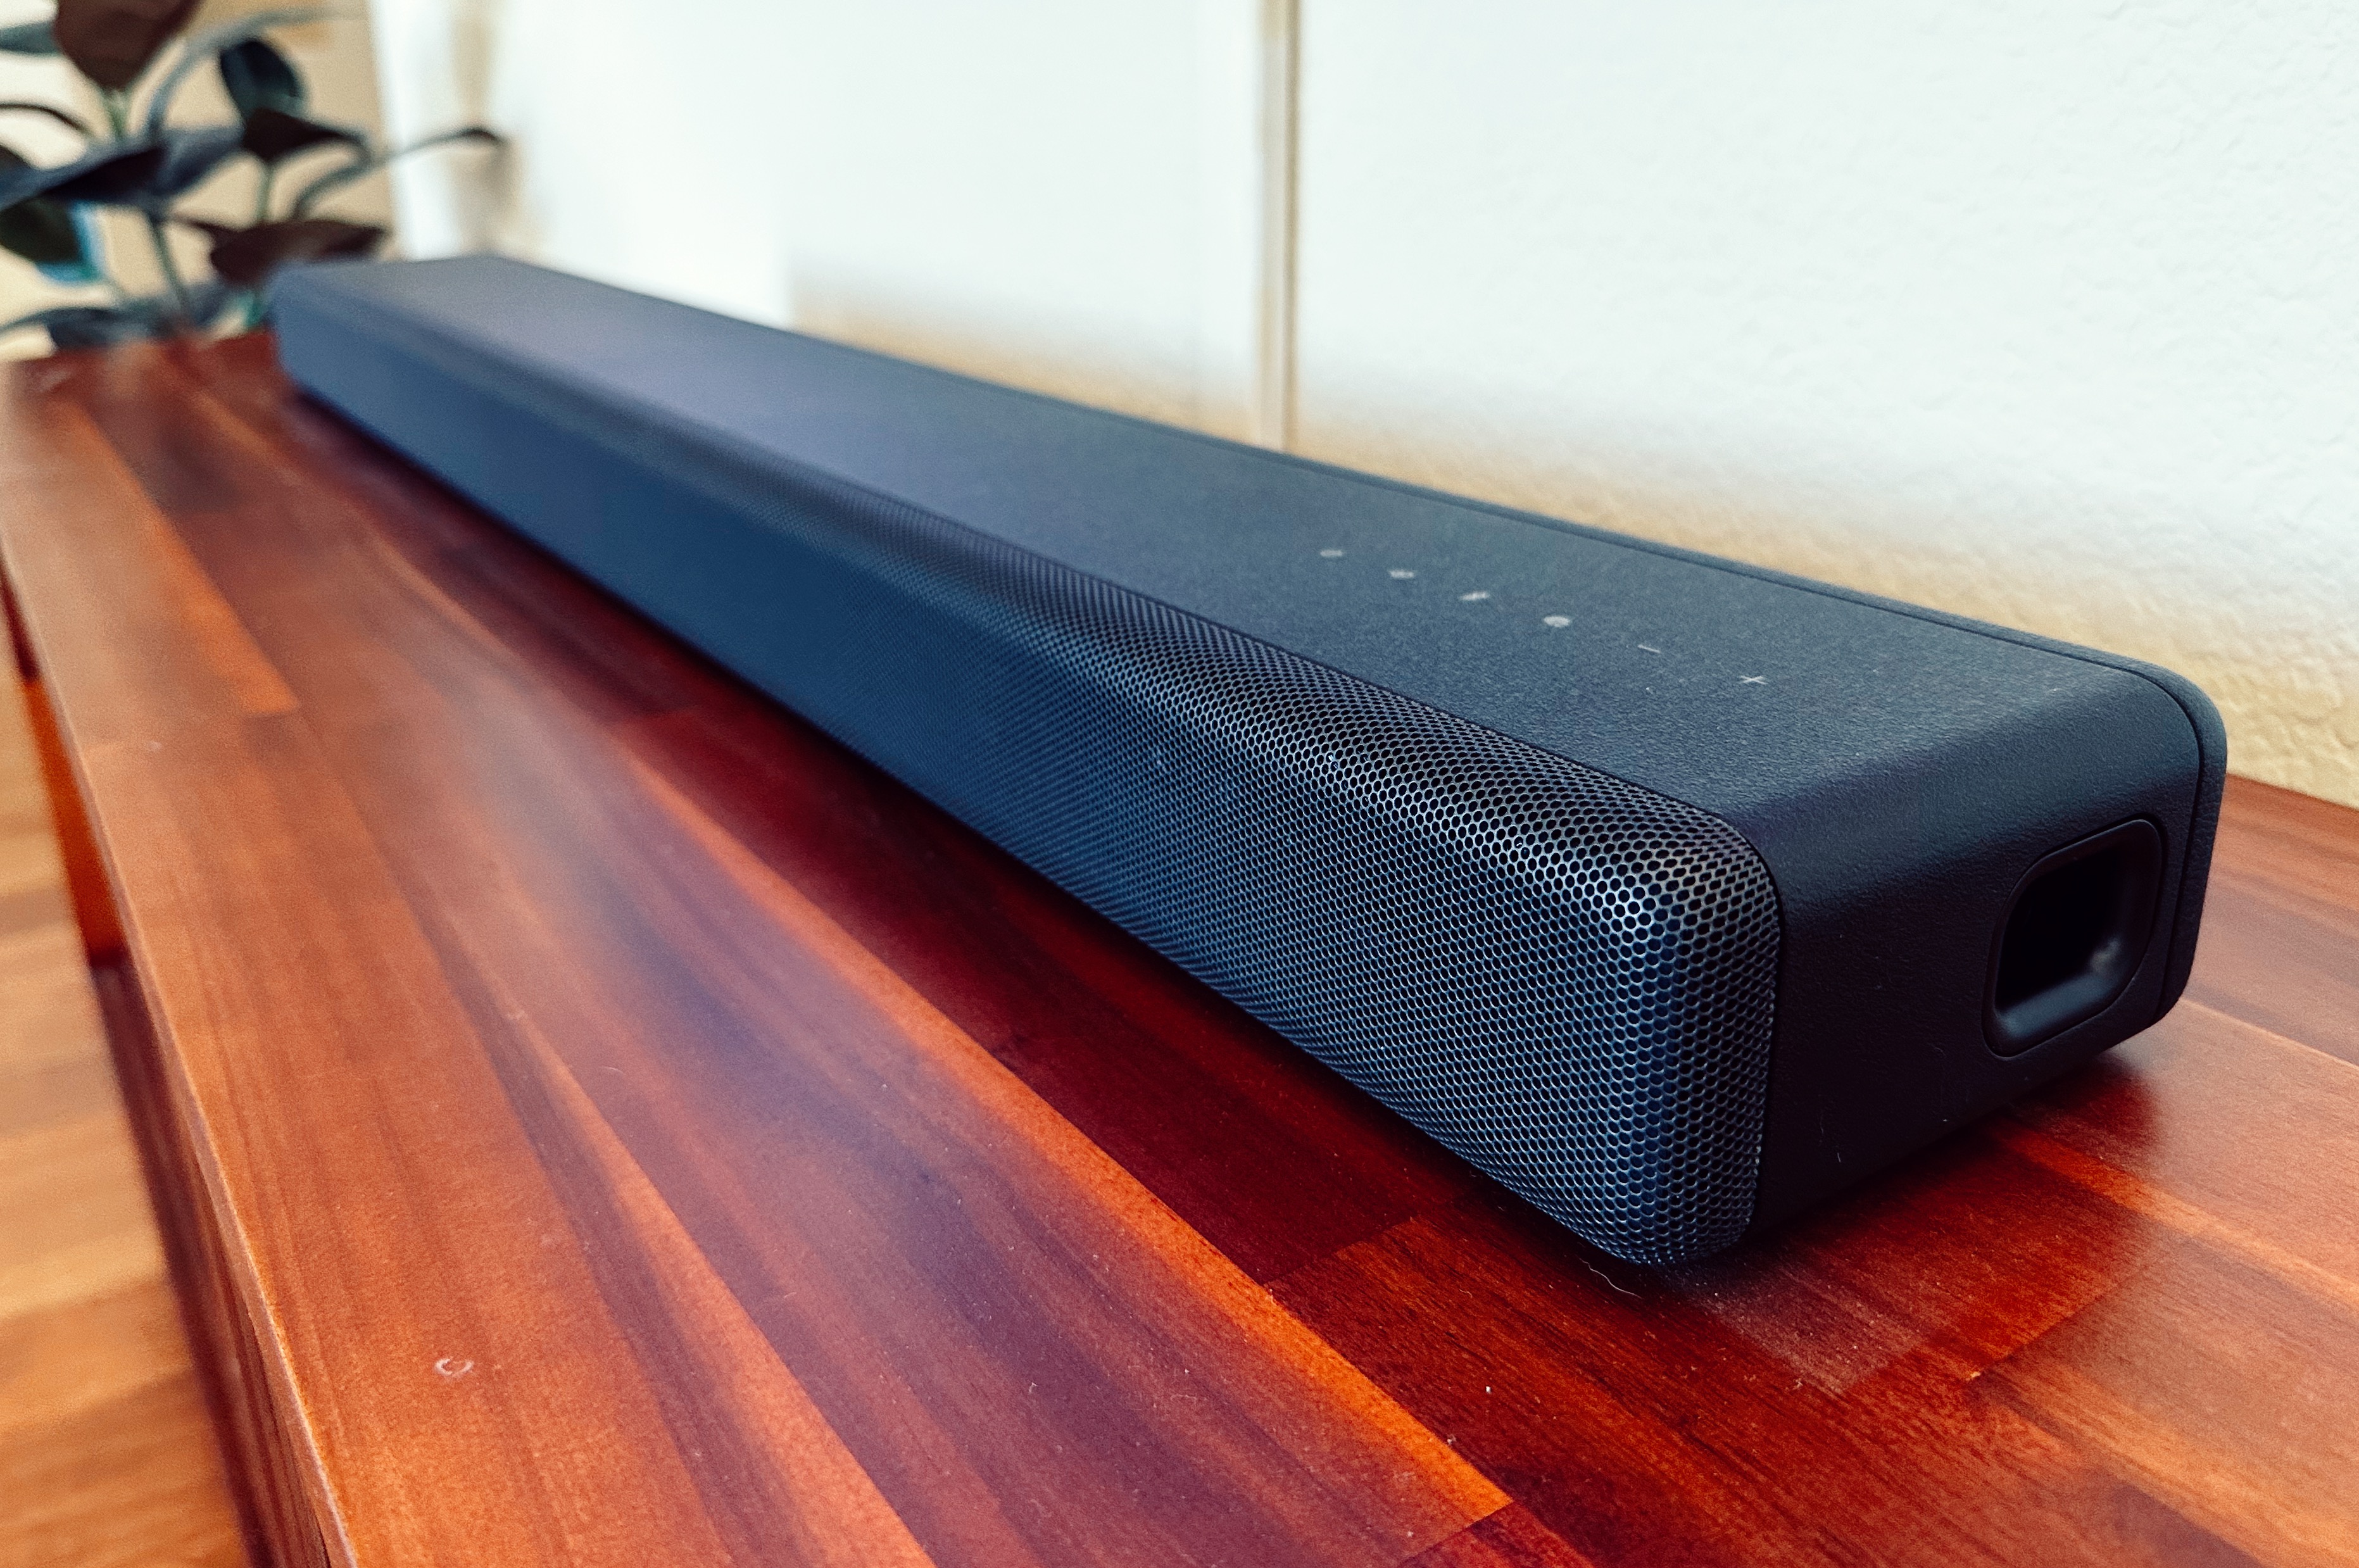 Sony HT-A3000 Soundbar With Built-In Subwoofer Is Great for Small